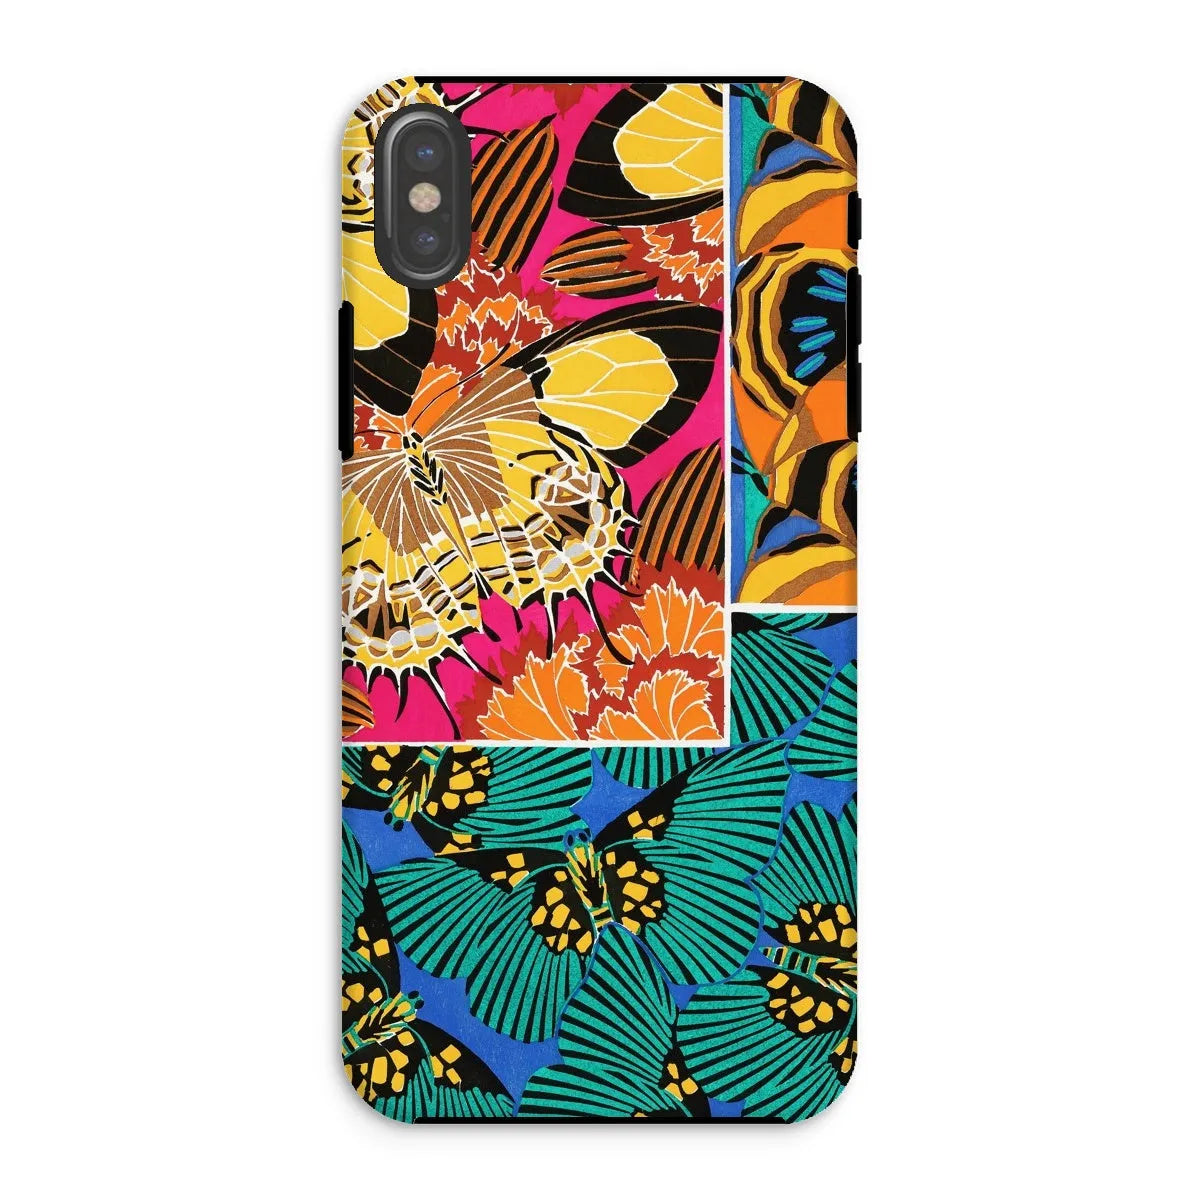 Rainbow Butterfly Aesthetic Art Phone Case - E.a. Seguy - Iphone Xs / Matte - Mobile Phone Cases - Aesthetic Art